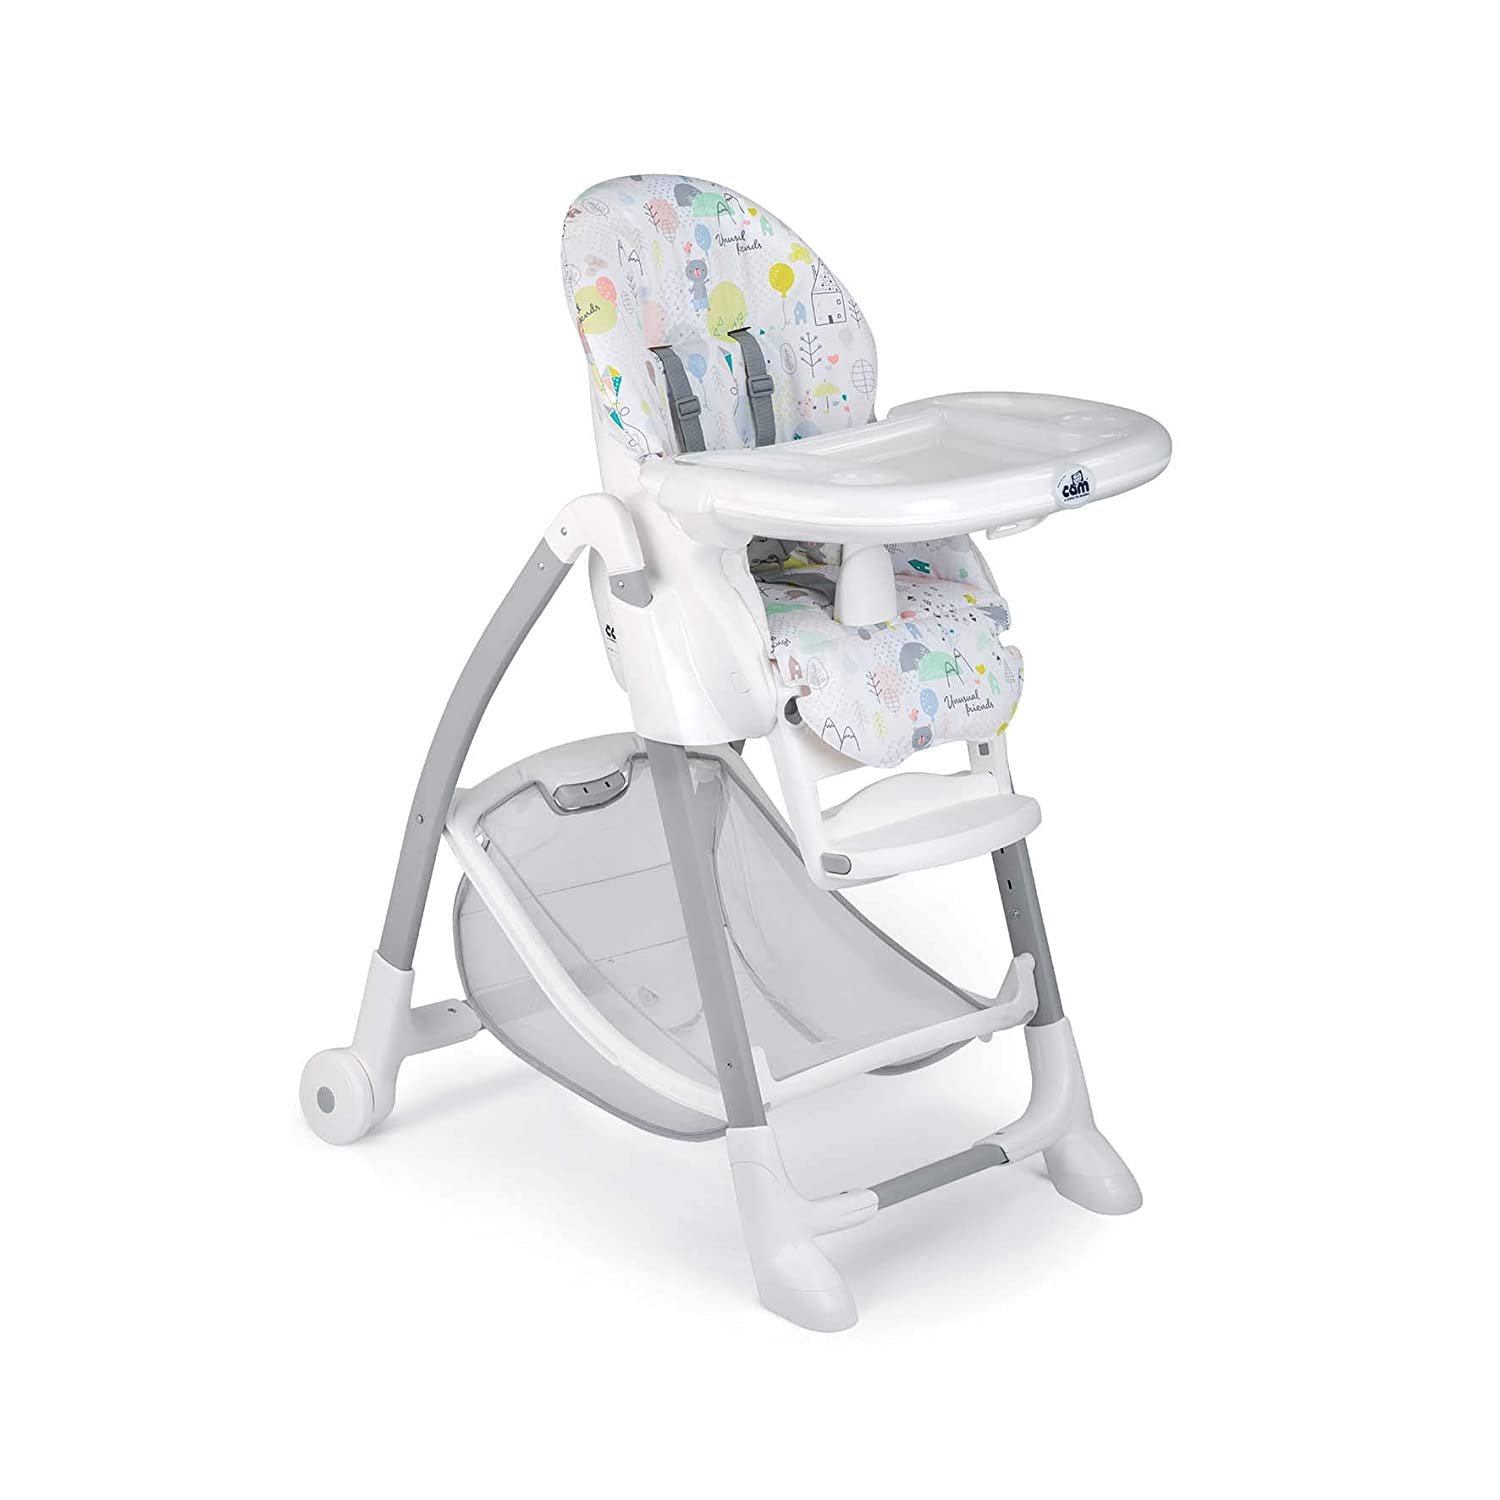 CAM GUSTO High Chair Baby Chair Michwachsend & Versatile Adjustable Including Tray Washable Cushion Soft Padding & Adjustable Strap Child High Seat - Made in Italy